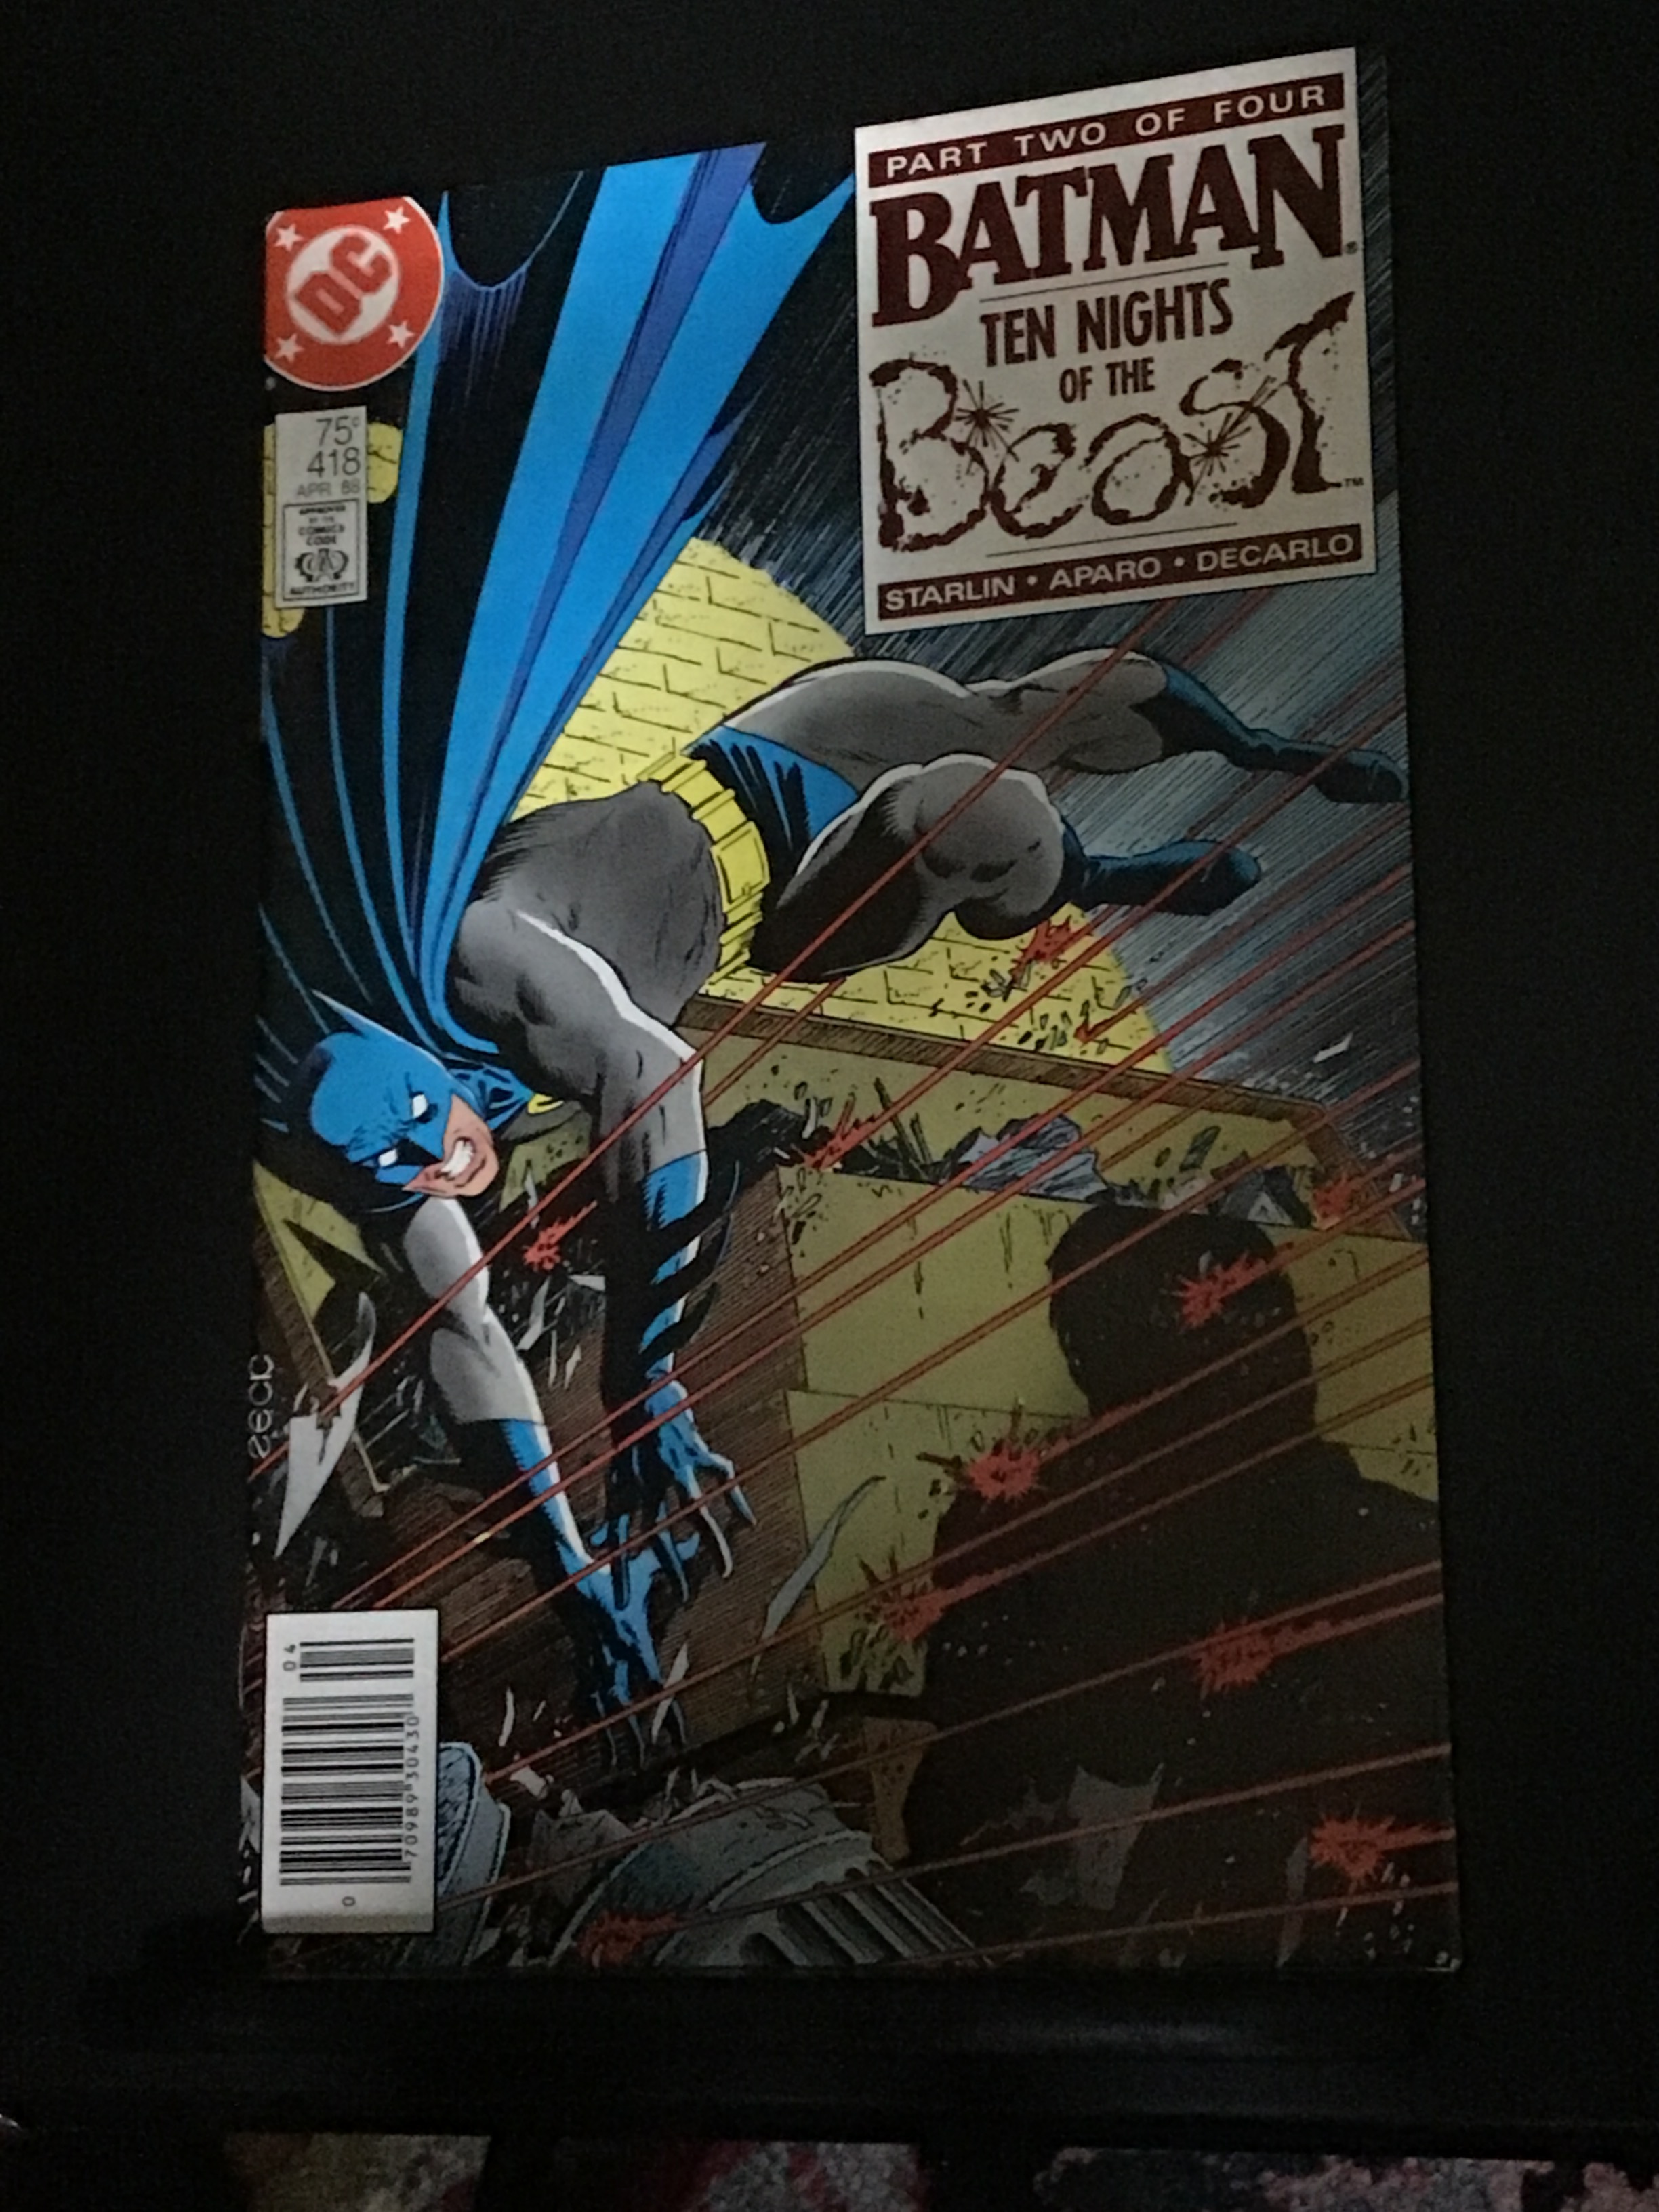 Batman #418 High-grade 10 nights of the beast part two. NM- Wow ...